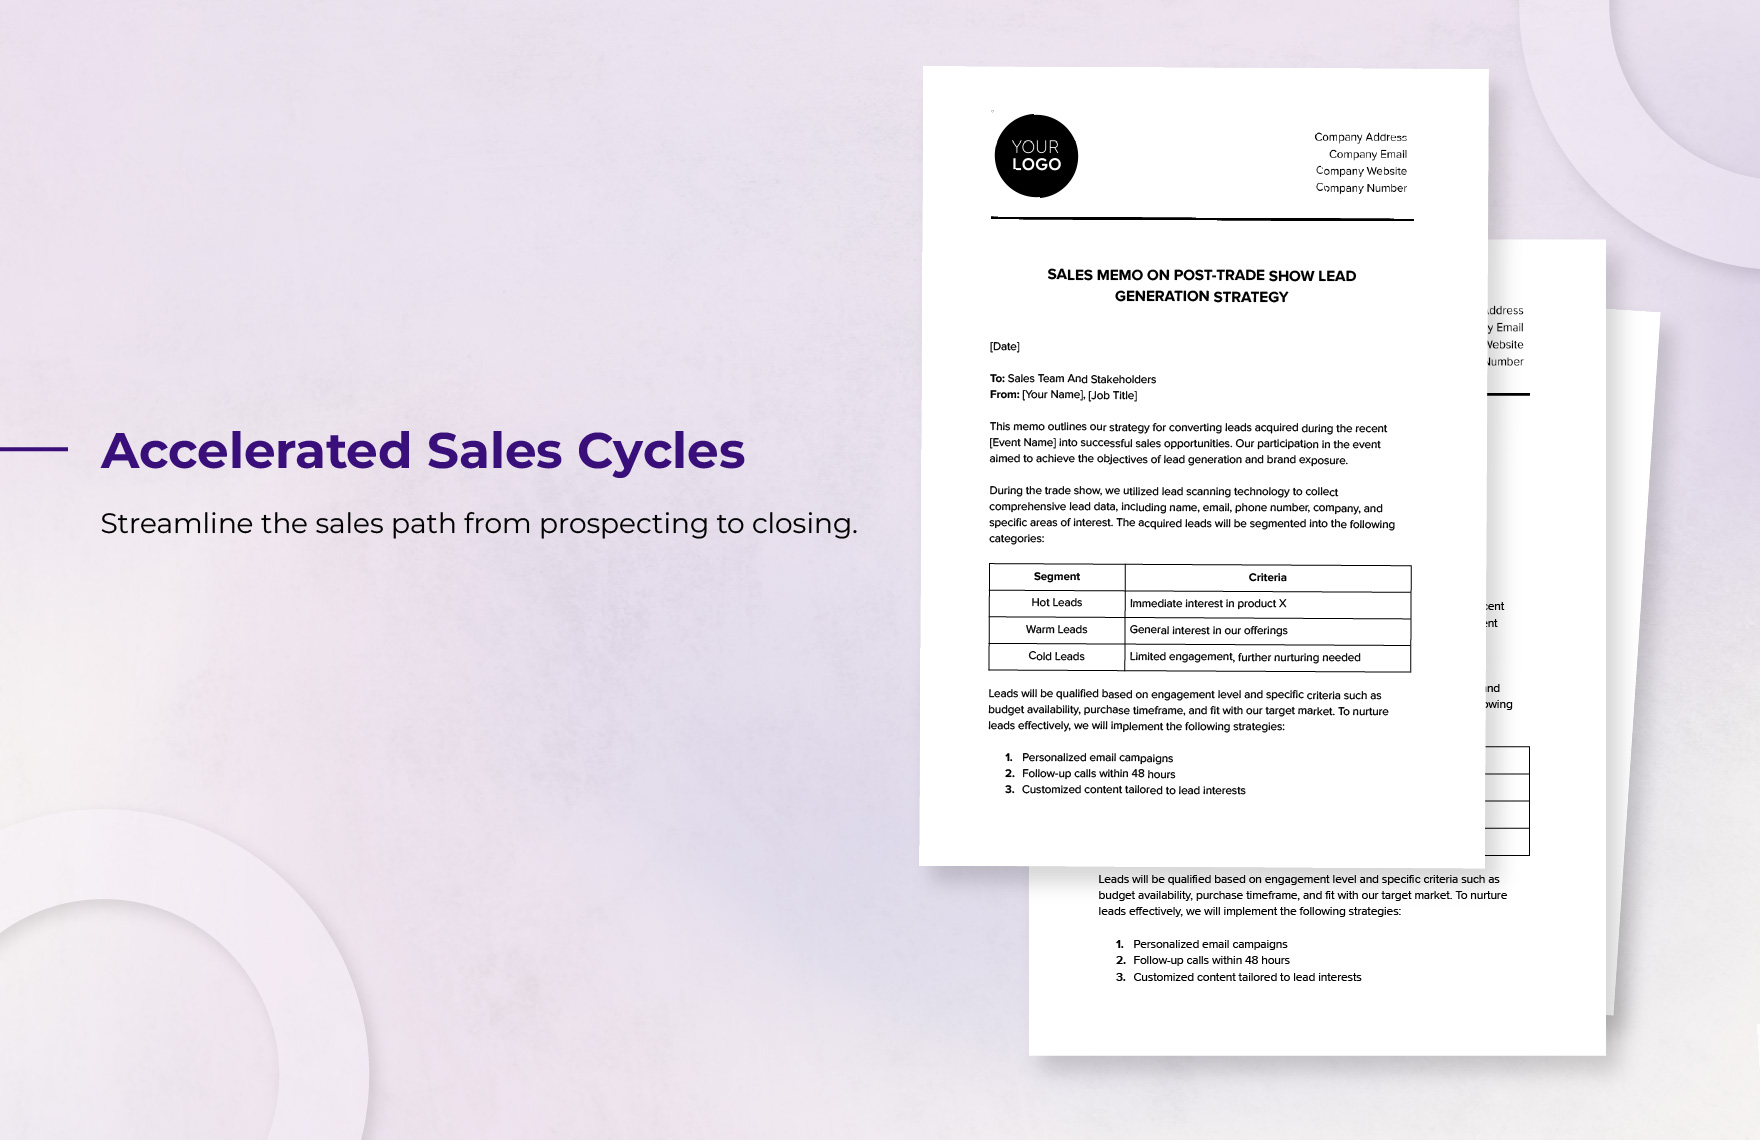 Sales Memo on Post-Trade Show Lead Generation Strategy Template